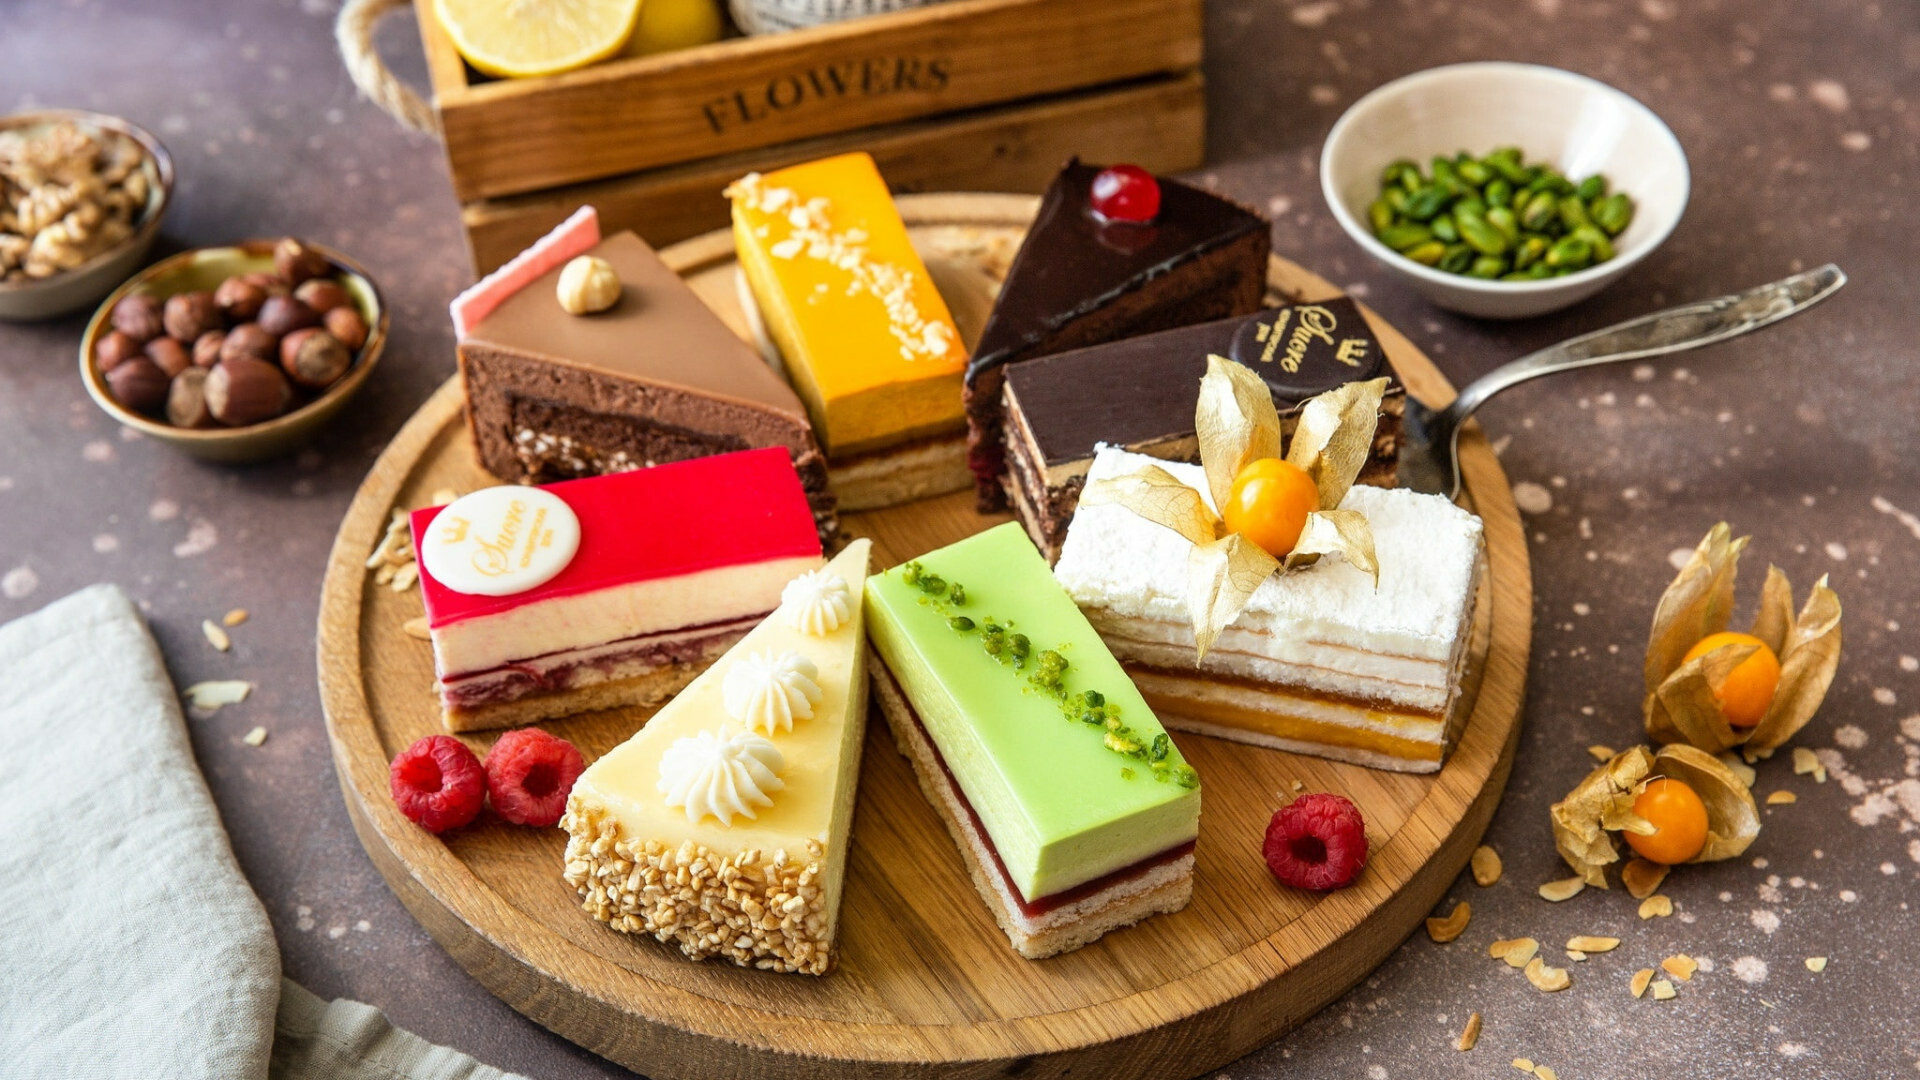 Sweets: Cake, Pastry, Baked goods. 1920x1080 Full HD Background.